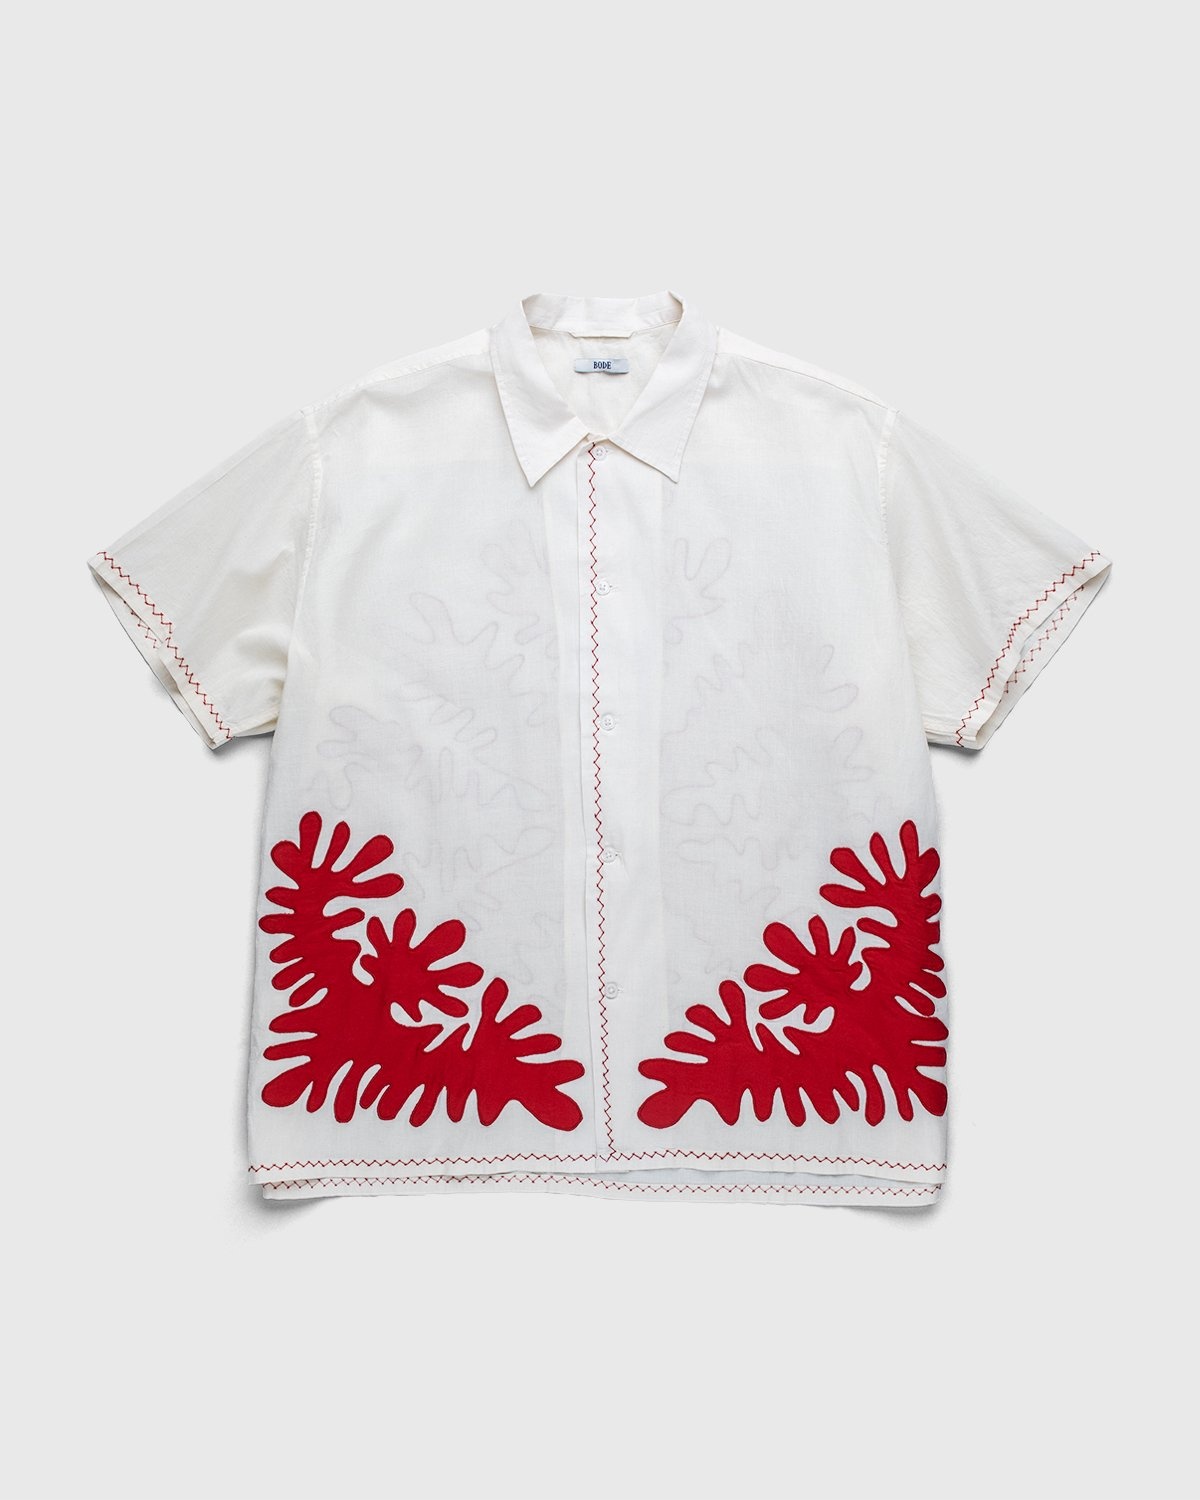 Bode – Setting Cut-Out Appliqué Shop Shirt S/S Highsnobiety Red Natural 